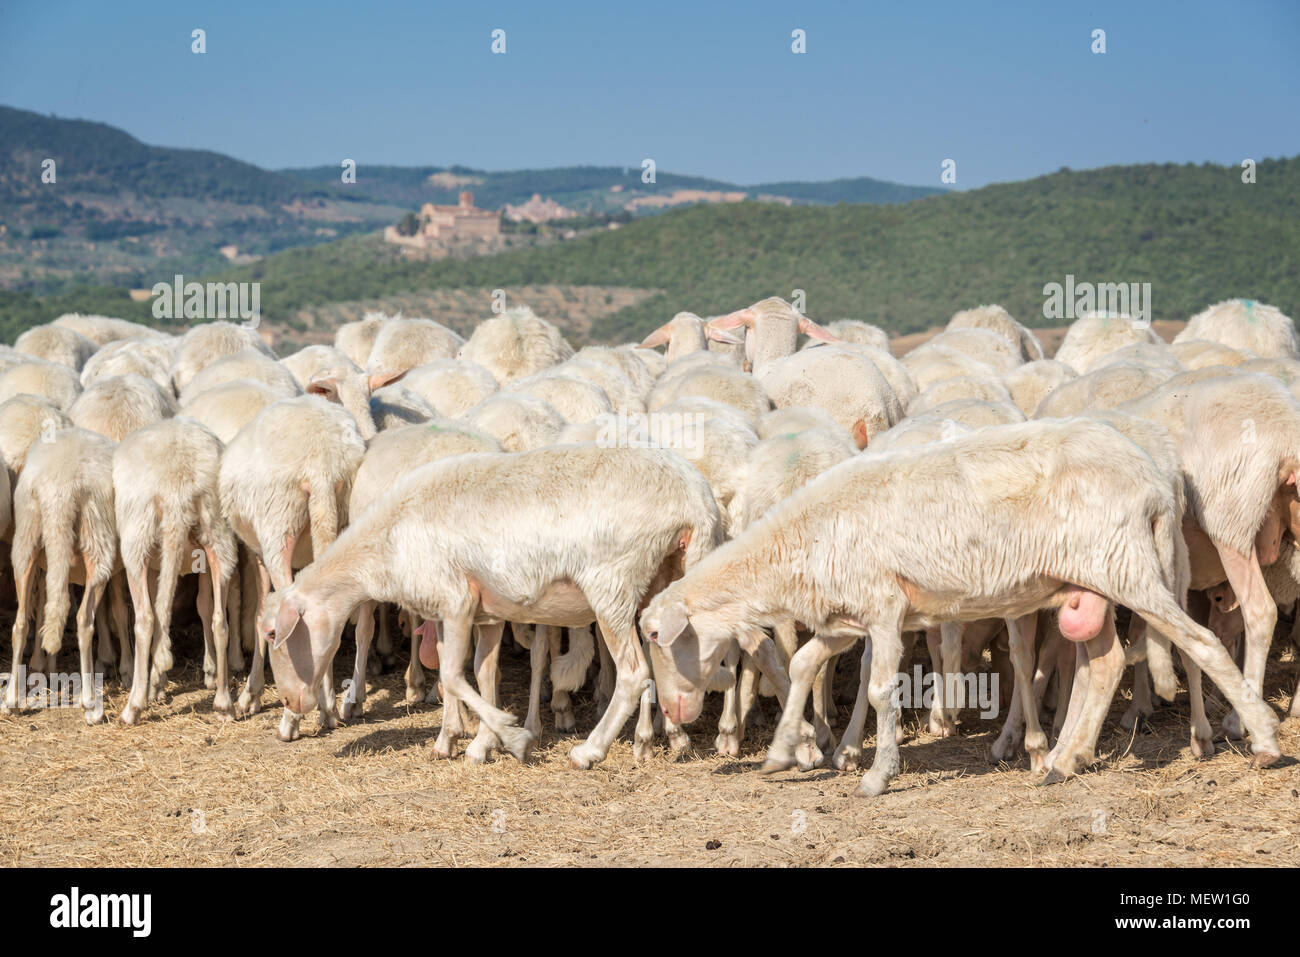 Herd of sheep in a dried field in summer, Italy Stock Photo